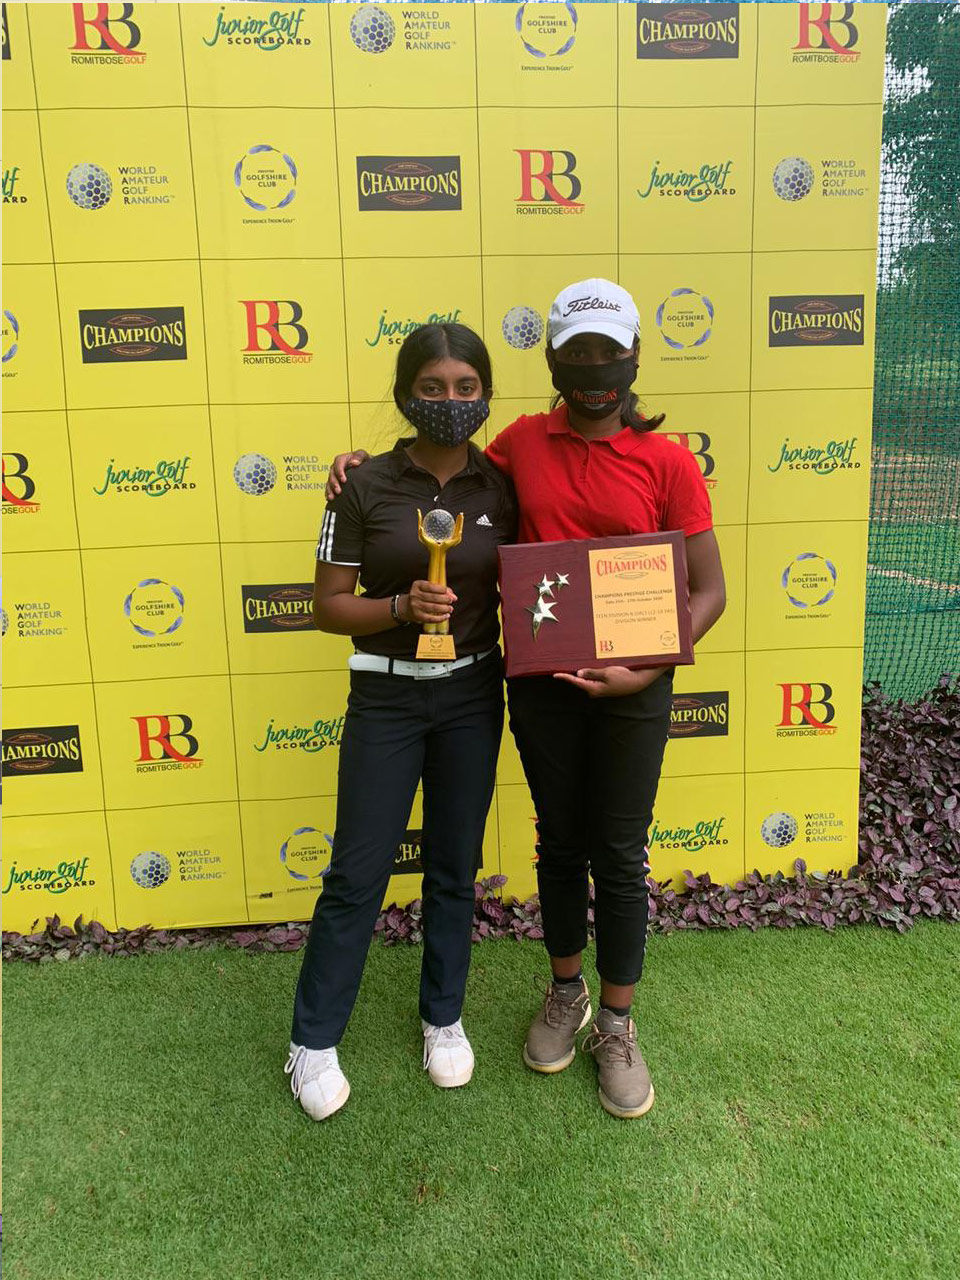 Tanishka Prithvi and Keerthana Rajeev finished 1st and 2nd respectively in the under 15 division